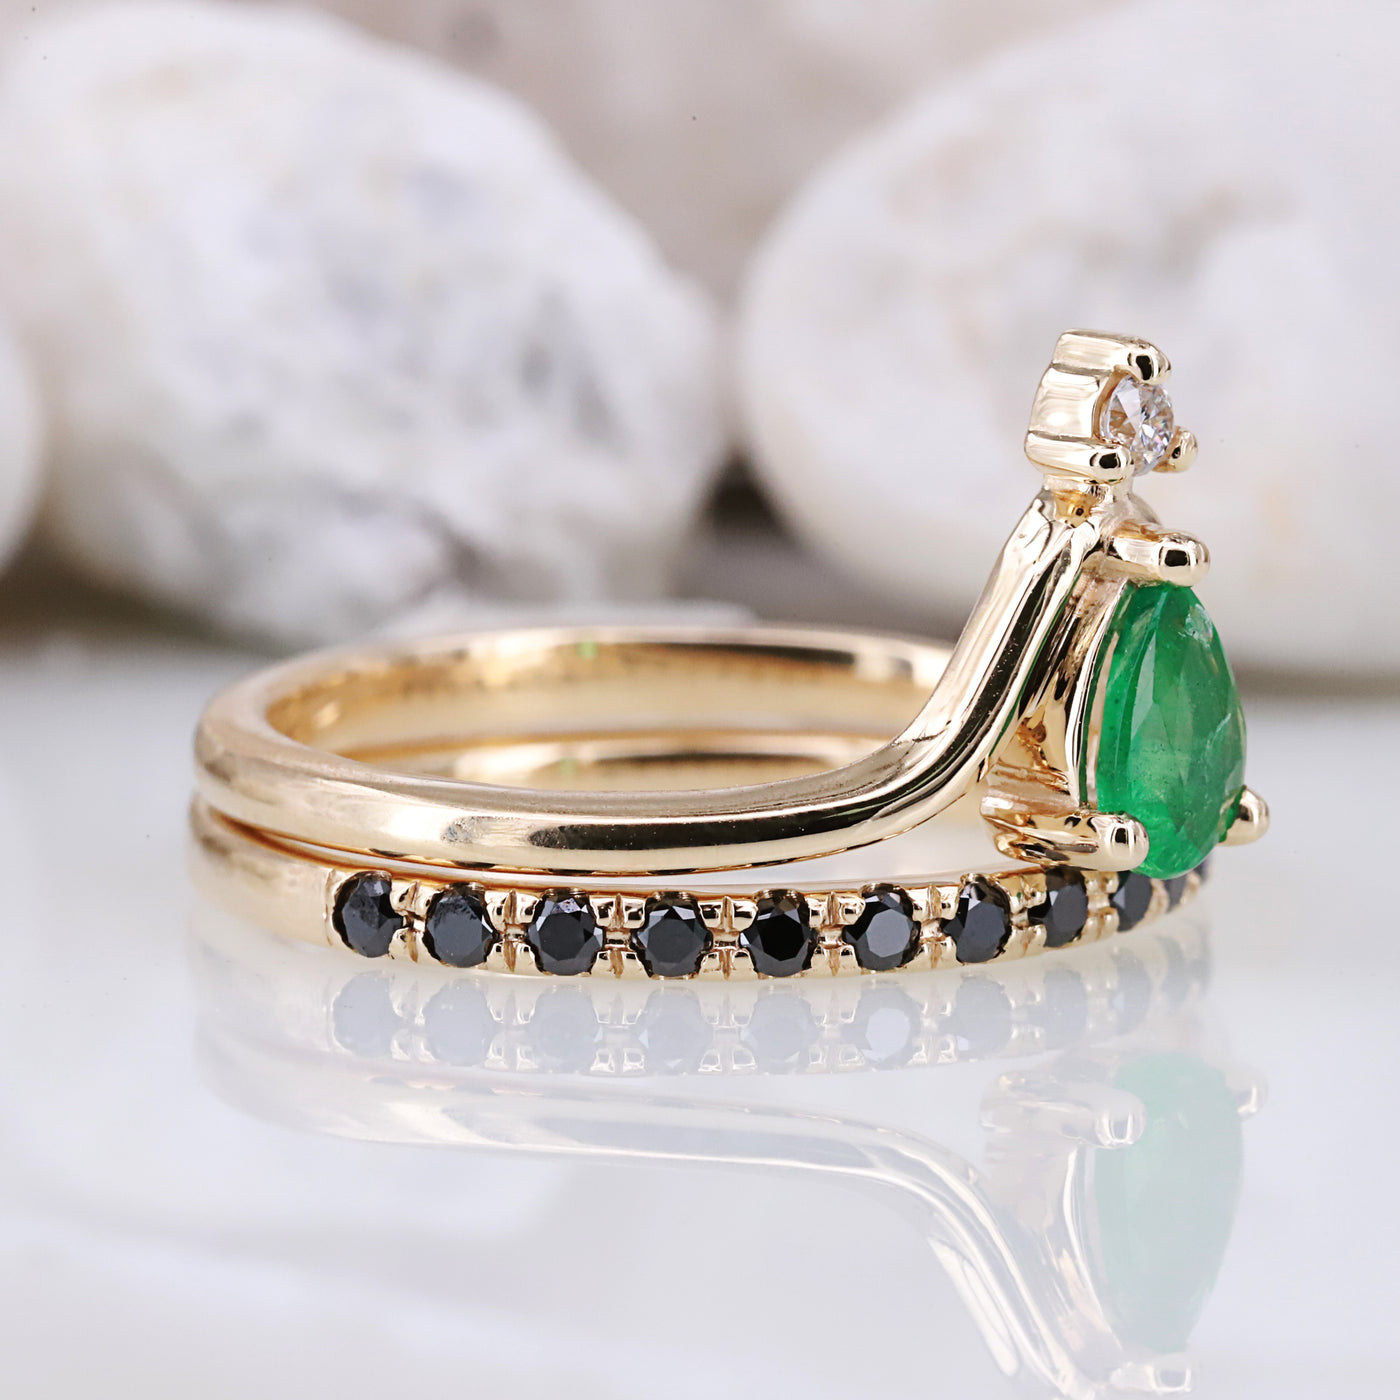 Exquisite Natural Pear Shaped Emerald and Black Diamond Ring - A Radiant and Elegant Design for Every Occasion Engagement Ring Ring for her